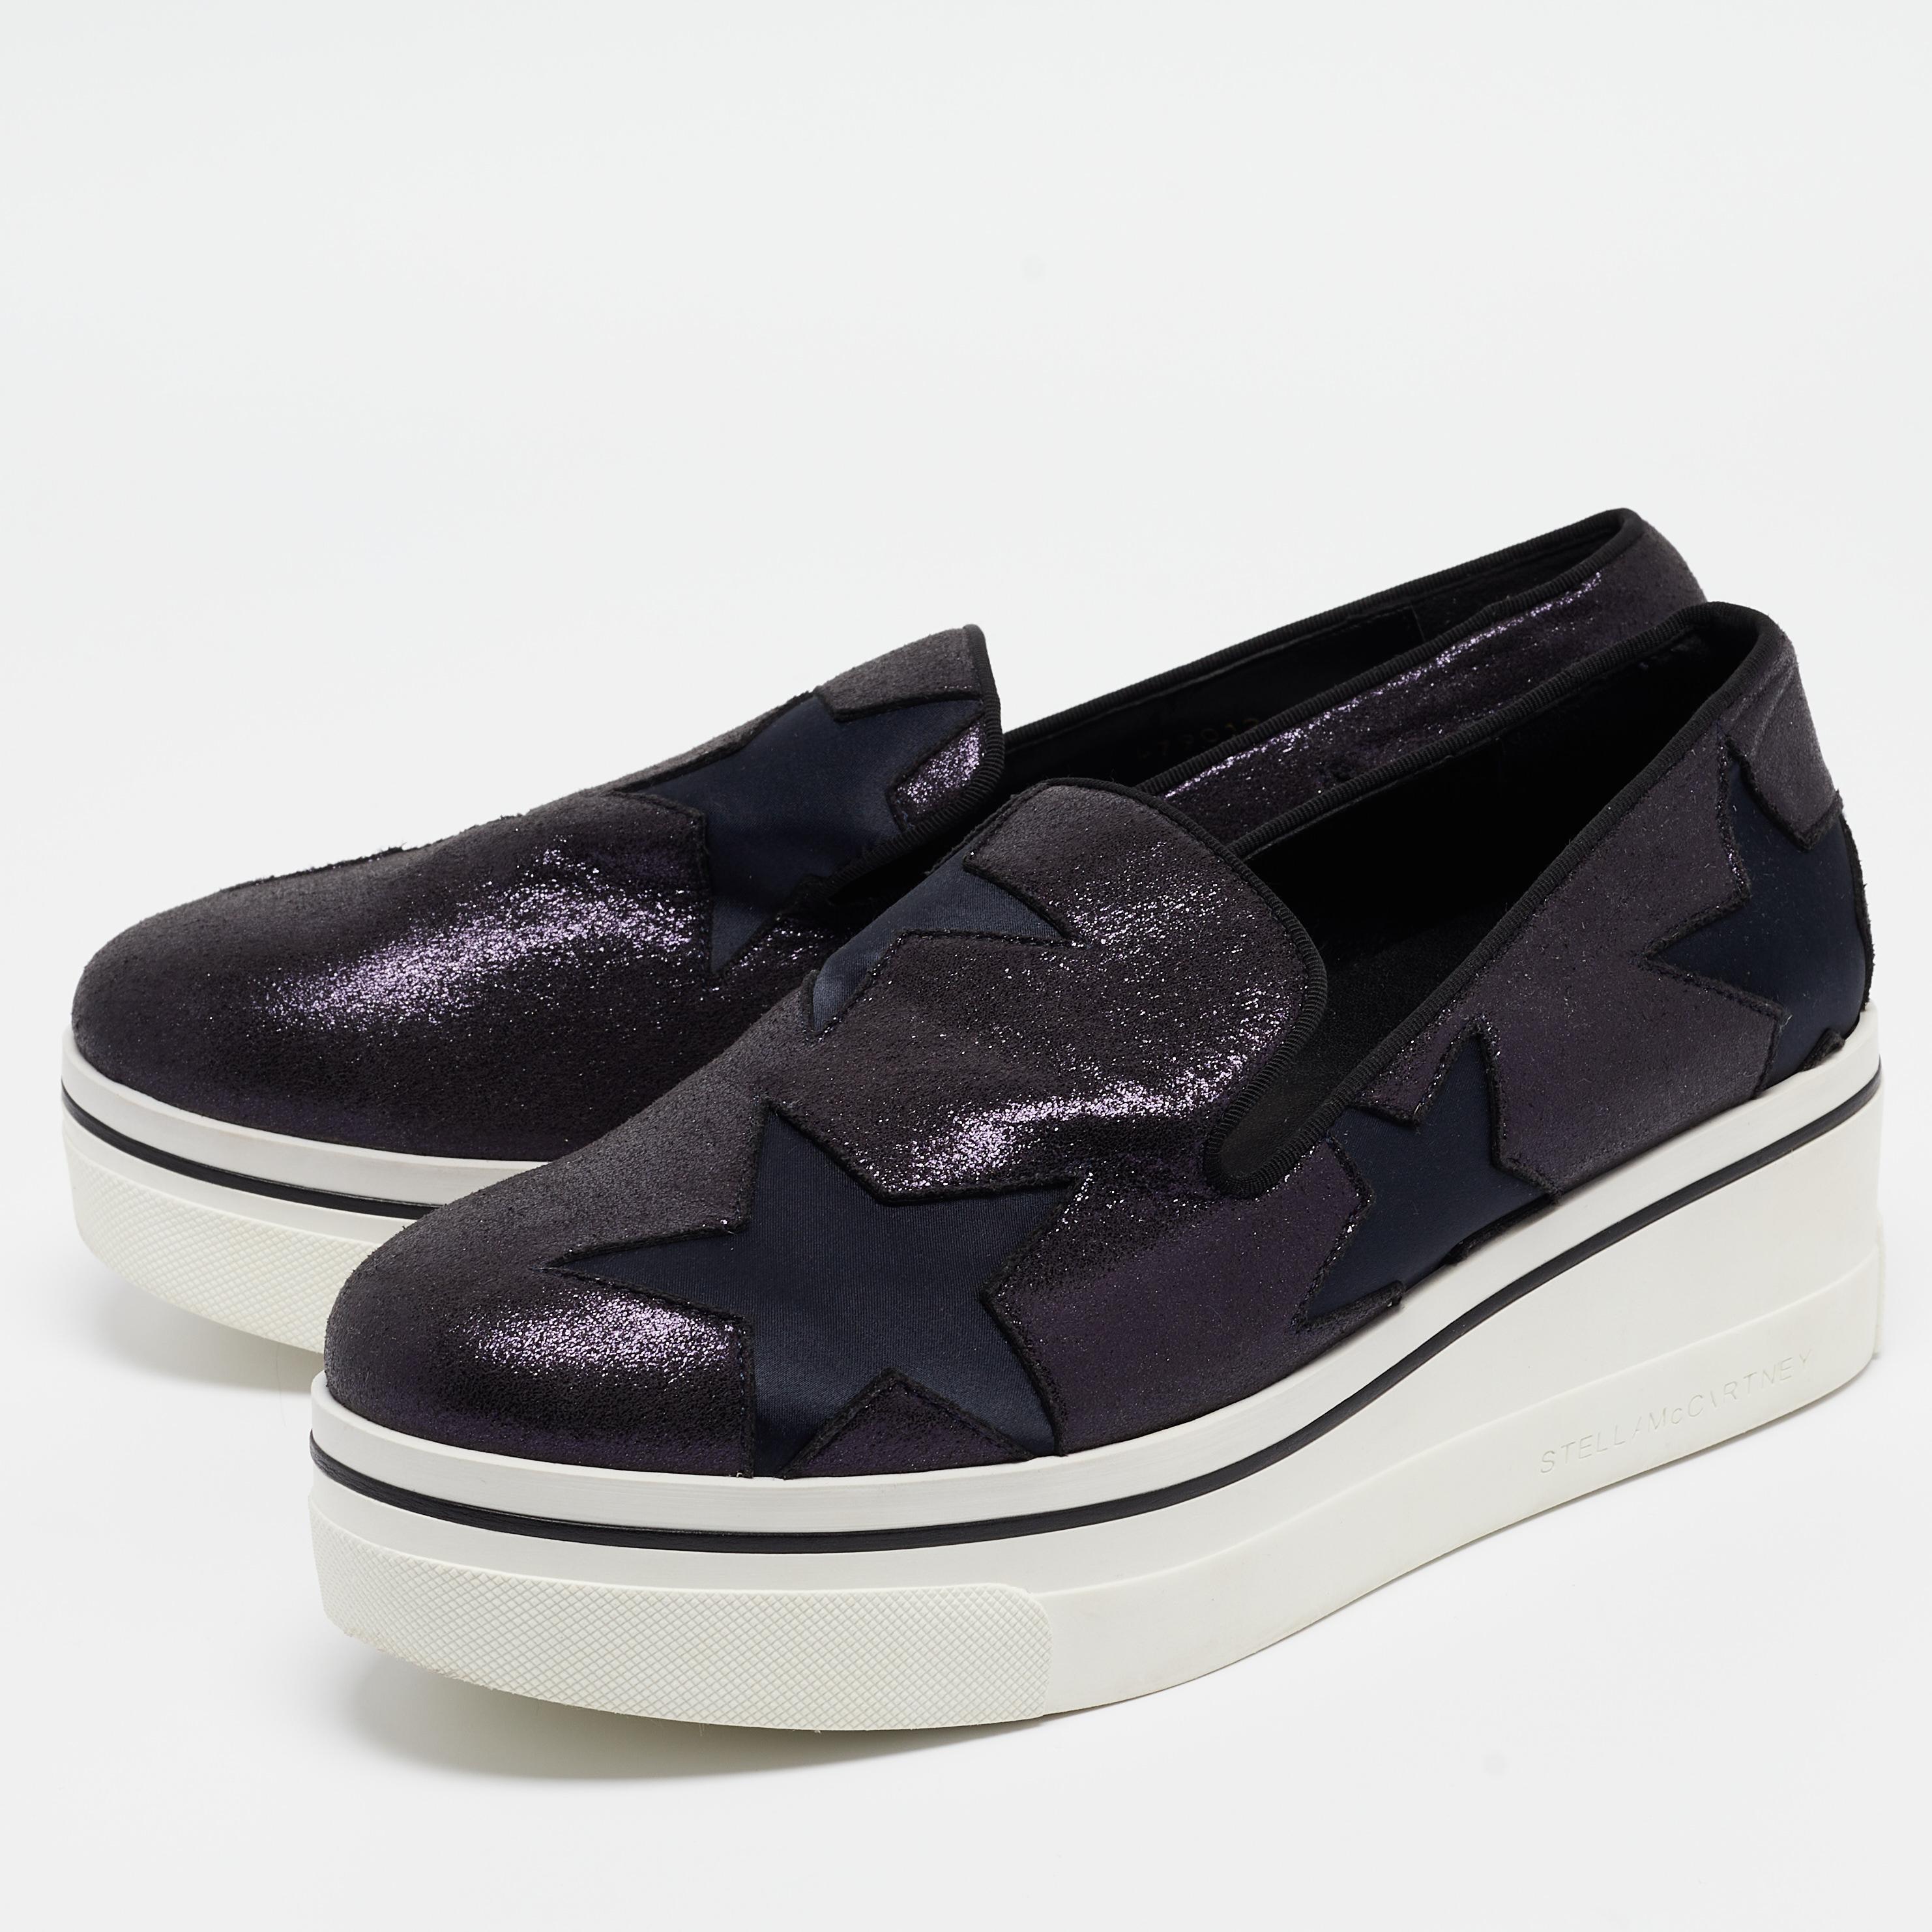 Give your outfit a luxe update with this pair of designer sneakers. The shoes are sewn perfectly to help you make a statement in them for a long time.

